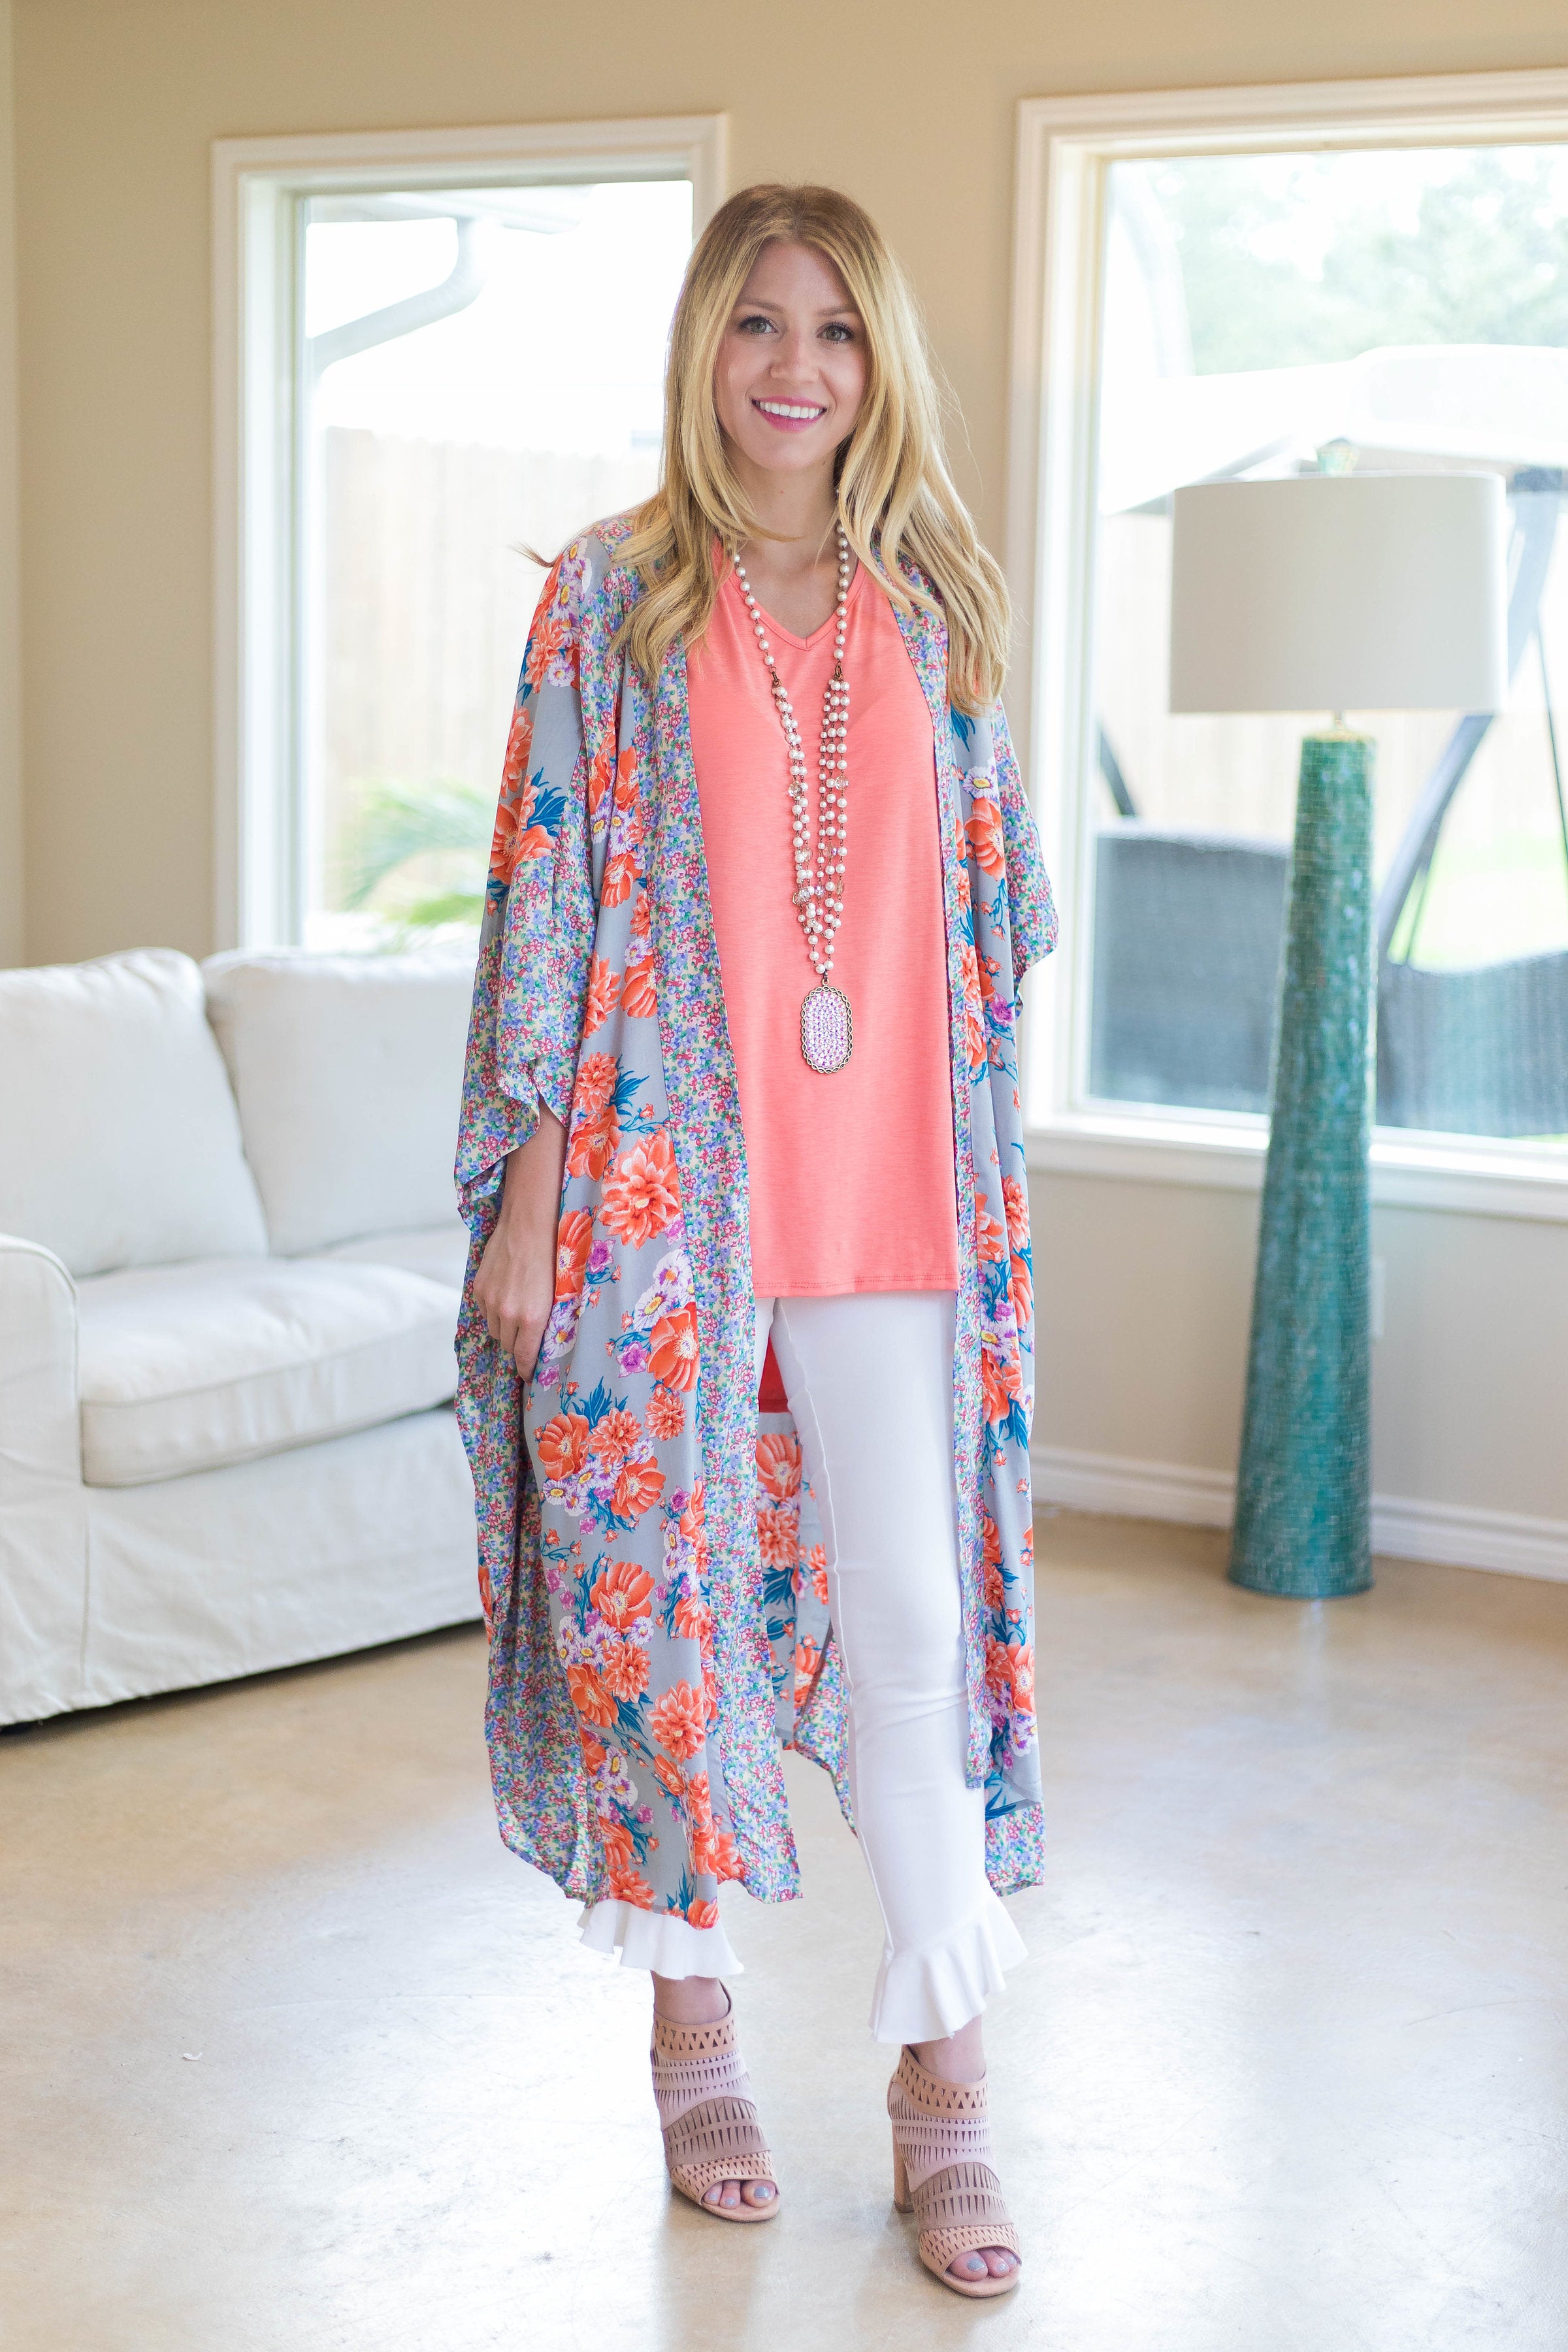 Last Chance Size S/M | See It All Floral Printed Duster in Grey with Orange Accents - Giddy Up Glamour Boutique